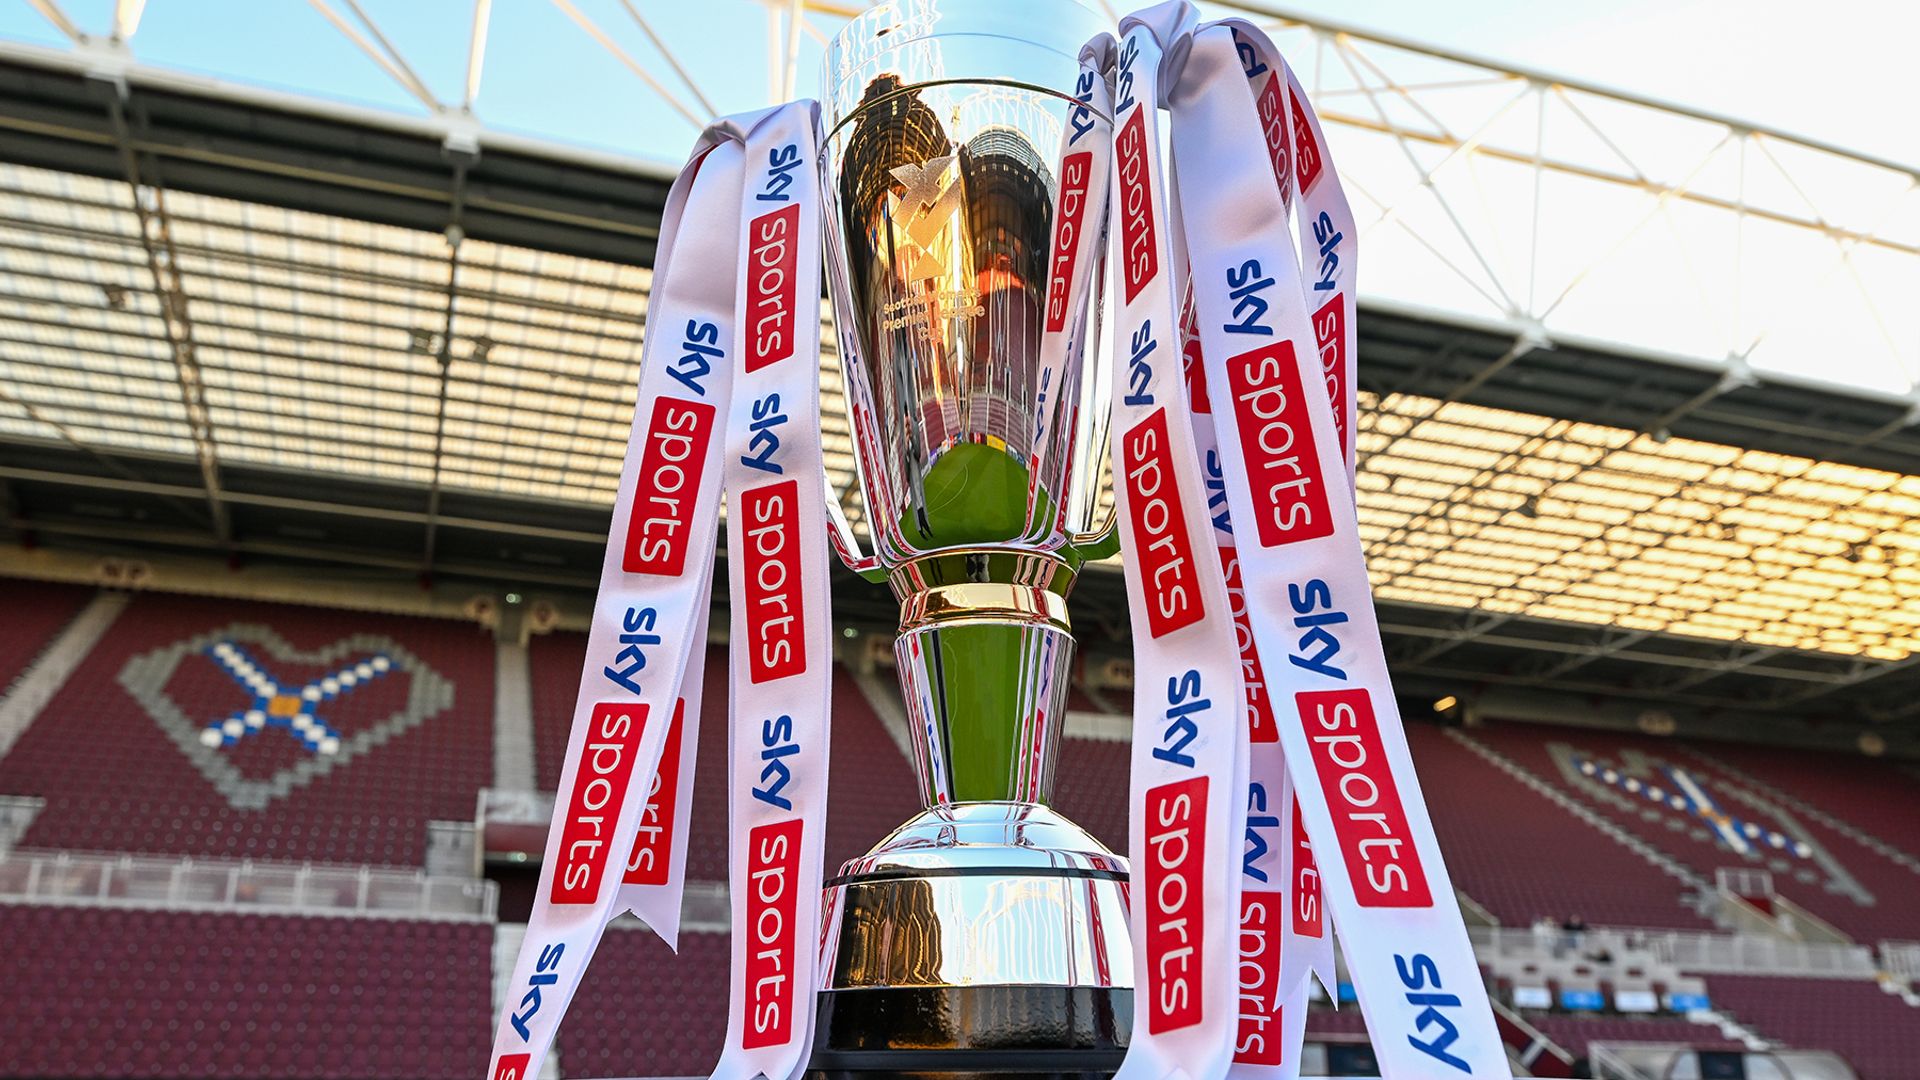 Sky Sports Cup final: All you need to know